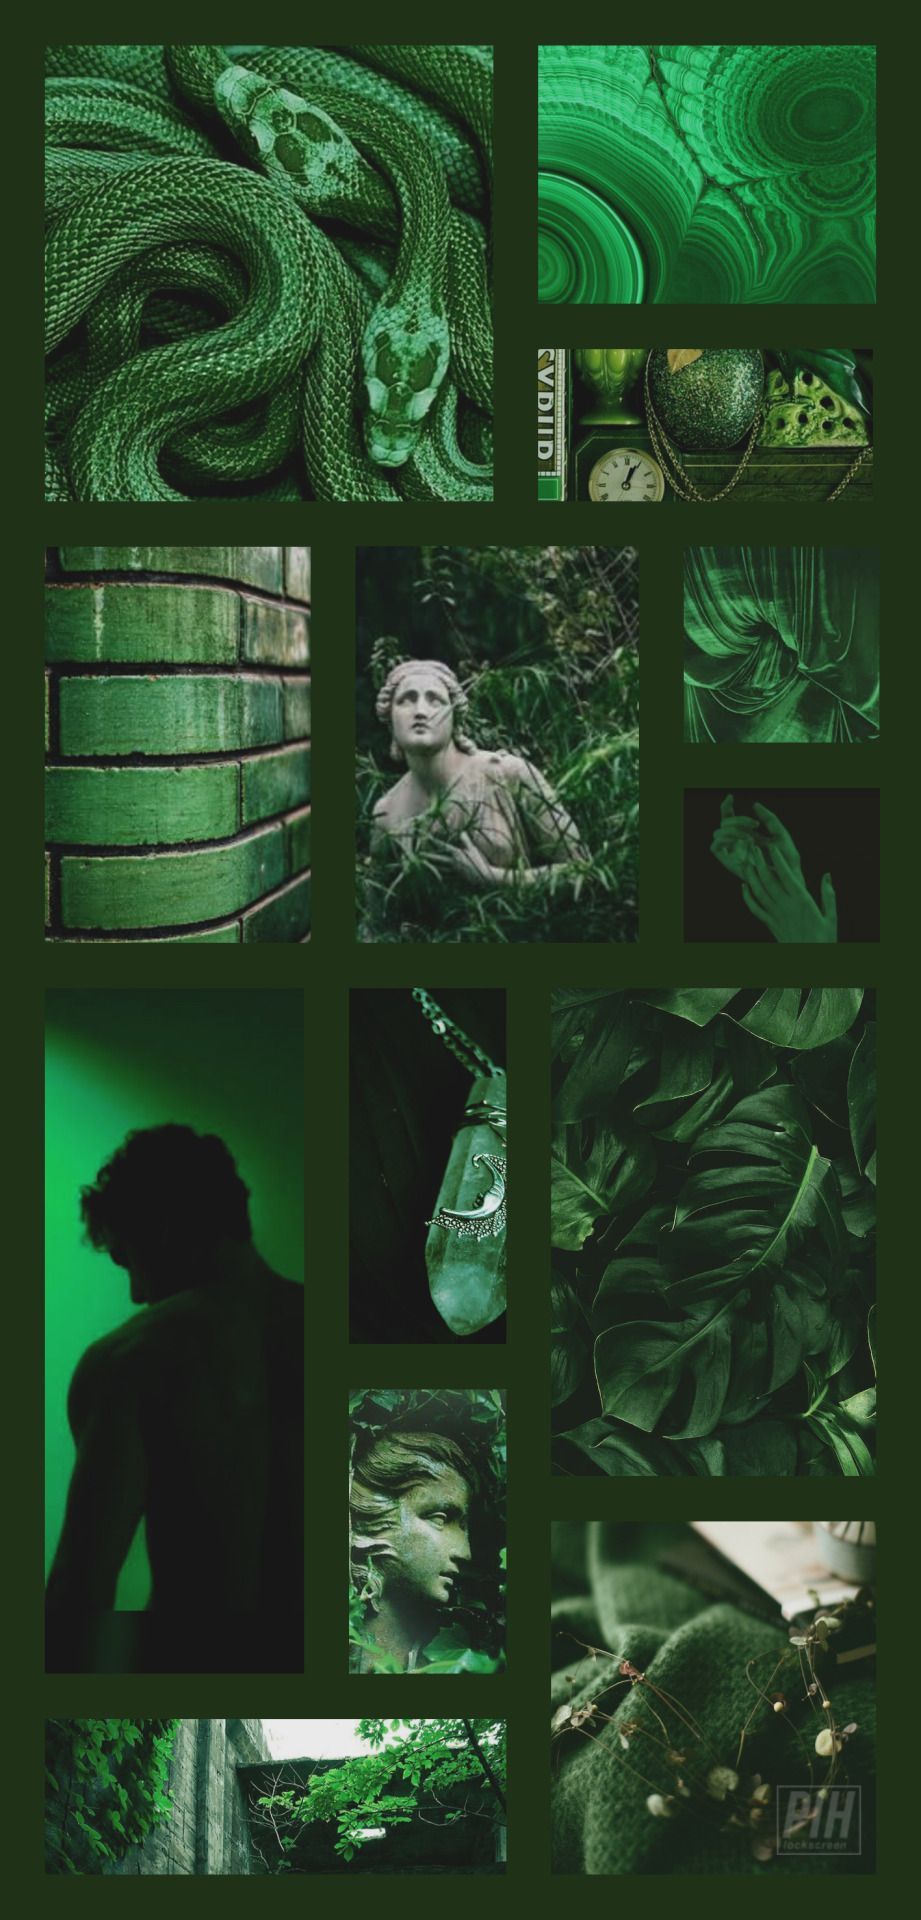 Aesthetic green wallpaper with a collage of pictures - Slytherin